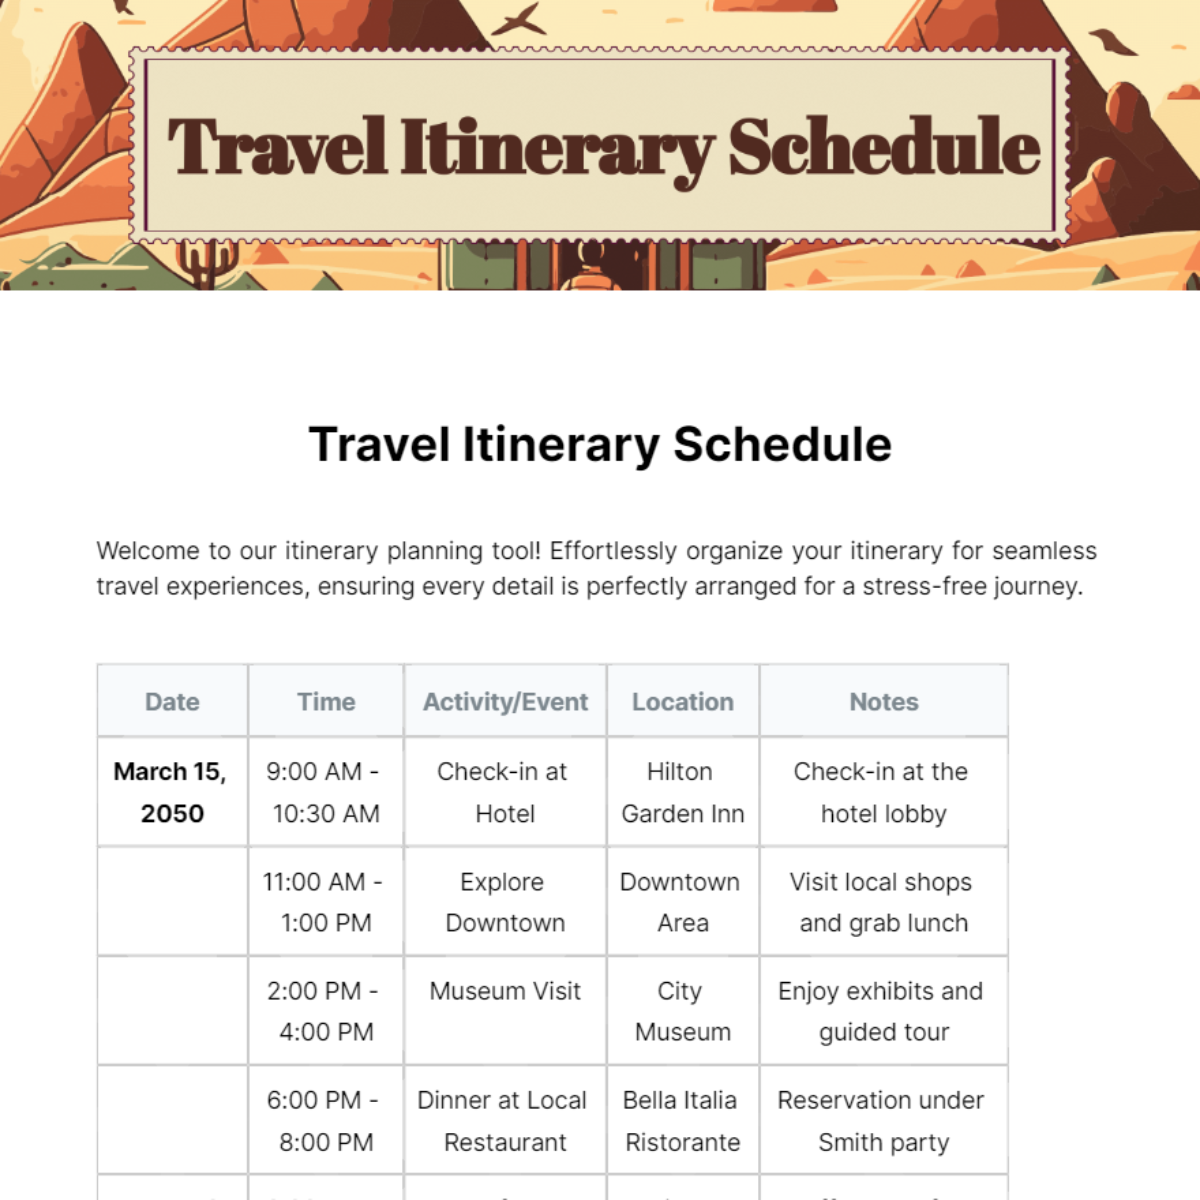 Free Travel Itinerary Schedule Template